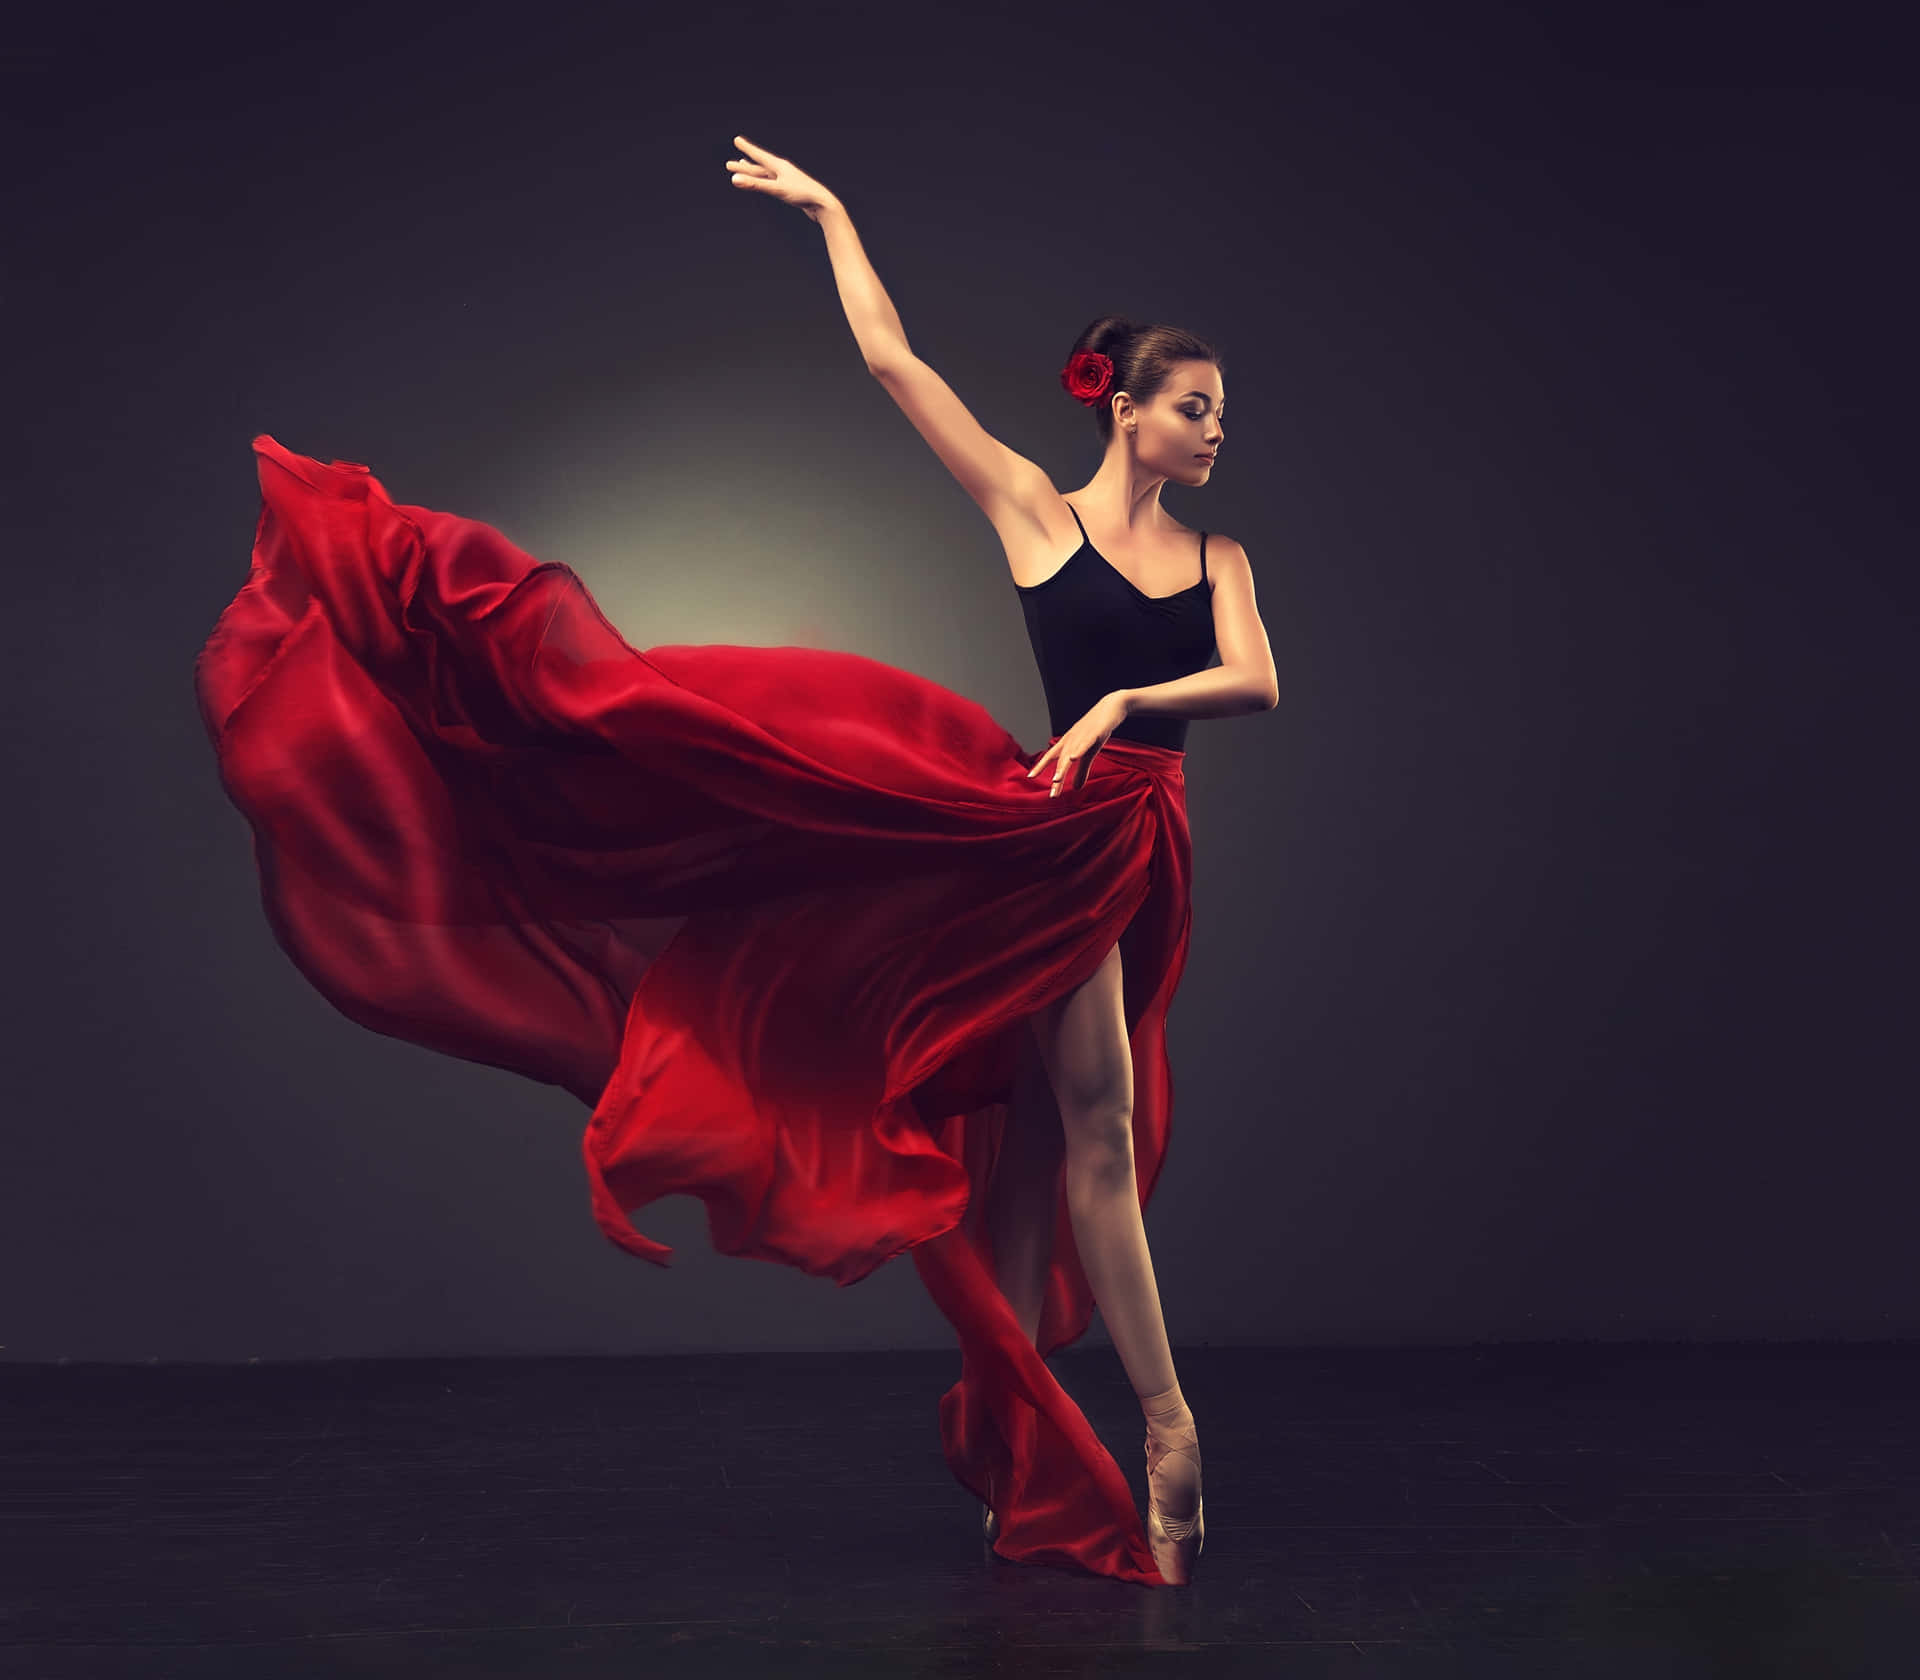 A Woman In A Red Dress Is Dancing